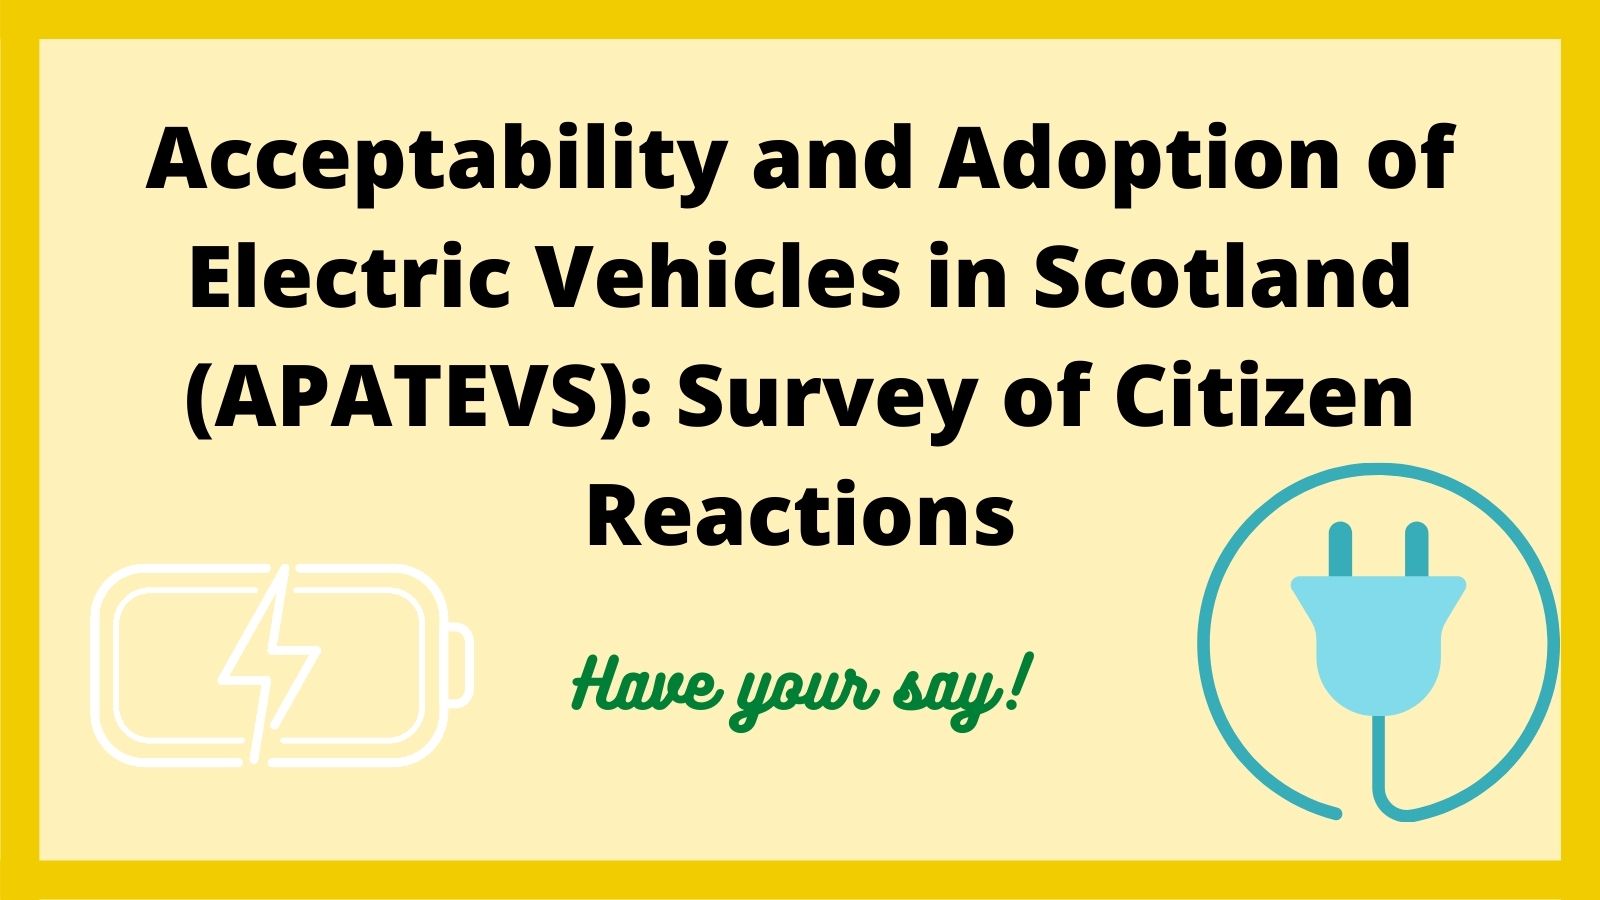 Have your say on adoption of EVs survey.FF7hOBLXMAMgUMp